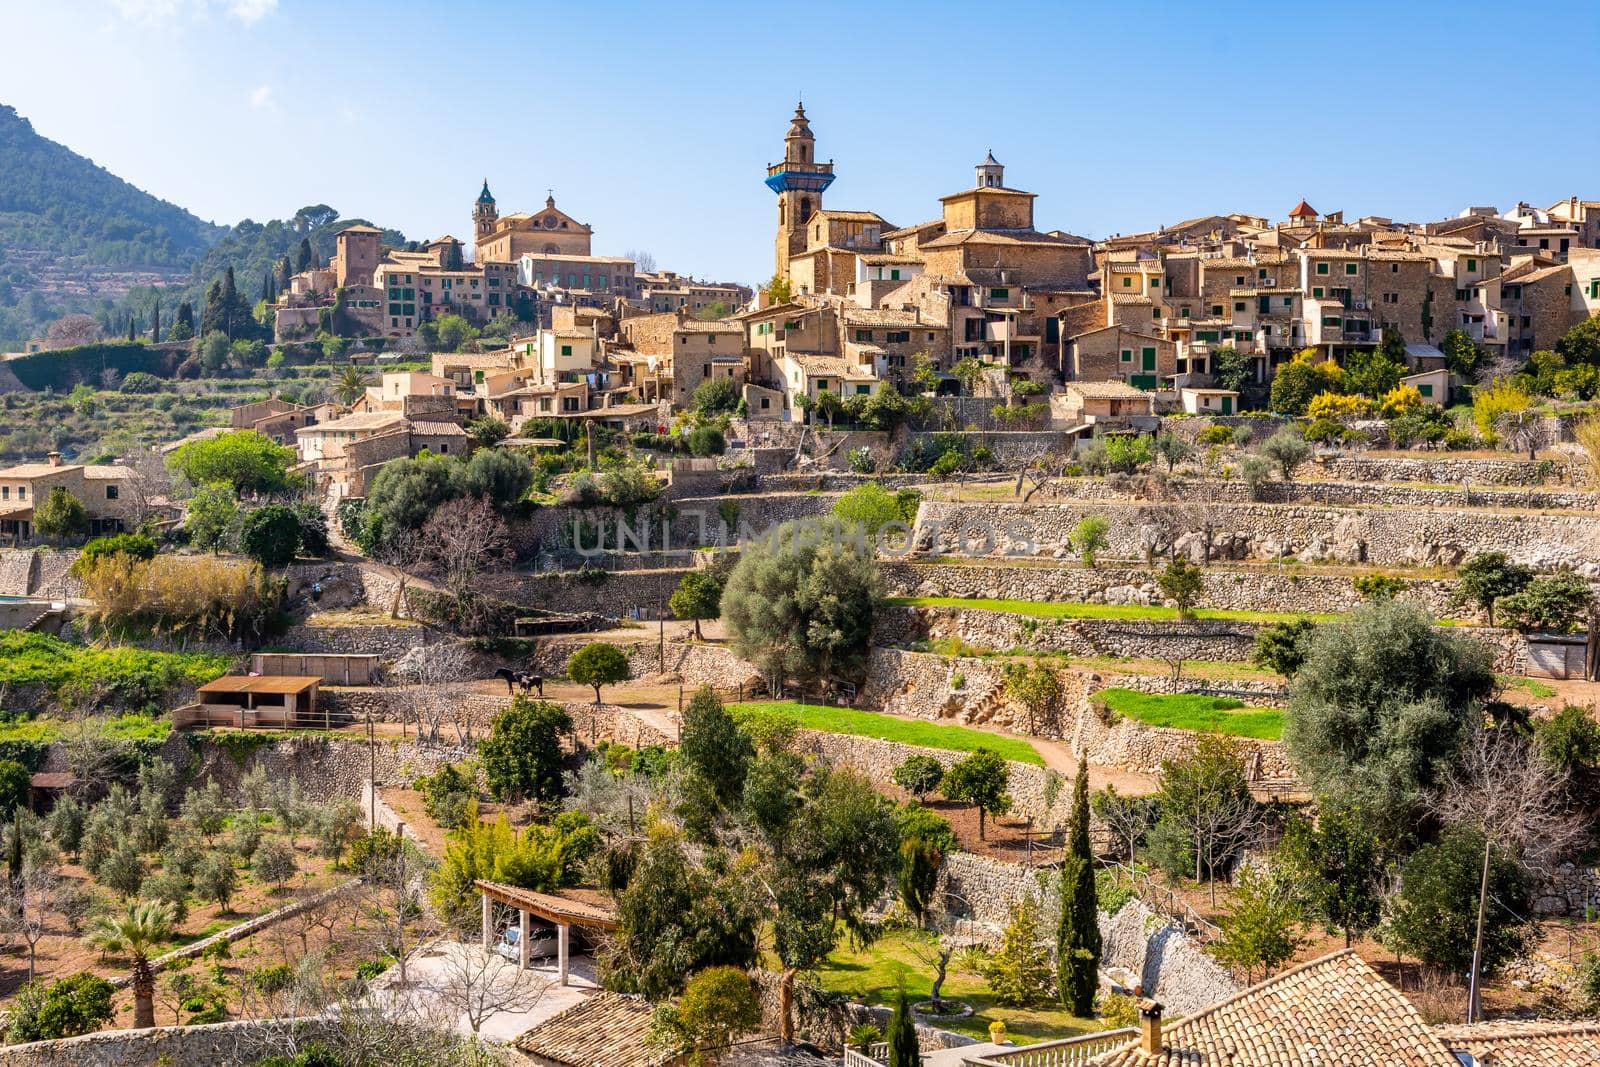 A beautiful view of the stairs and the buildings in Valldemossa, Mallorca Spain on a sunny day